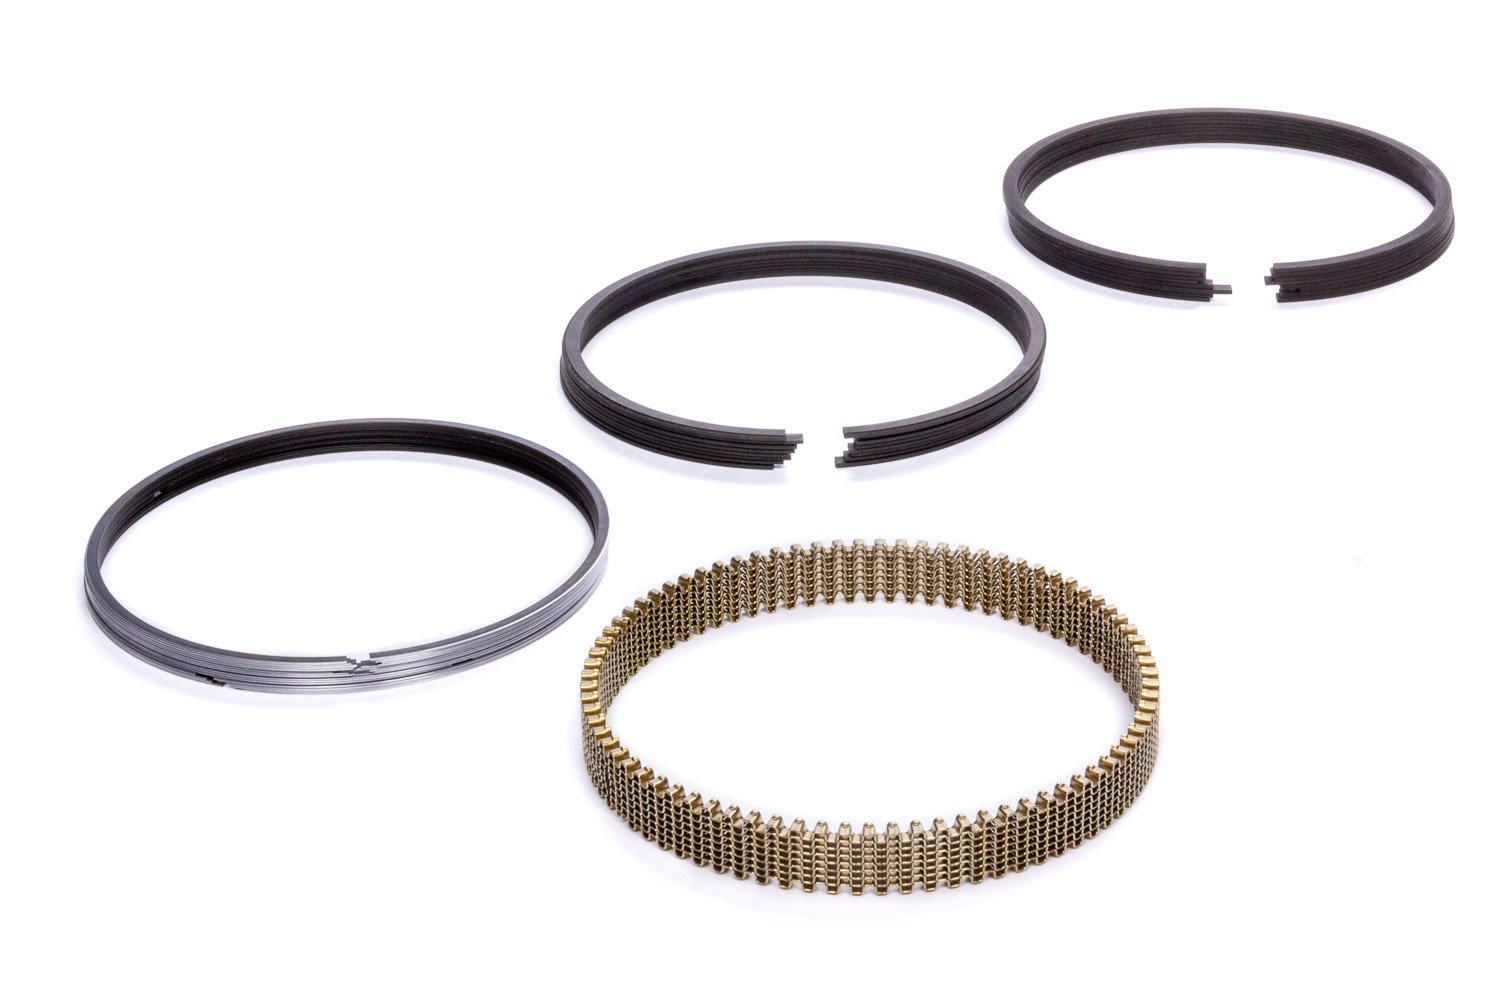 Hastings Piston Rings SN9050040 Piston Rings, Premium Ductile and Steel Series, 4.165 in Bore, Drop In, 1.2 x 1.2 x 3.0 mm Thick, Standard Tension, Stainless Steel, Gas Nitride, 8-Cylinder, Kit